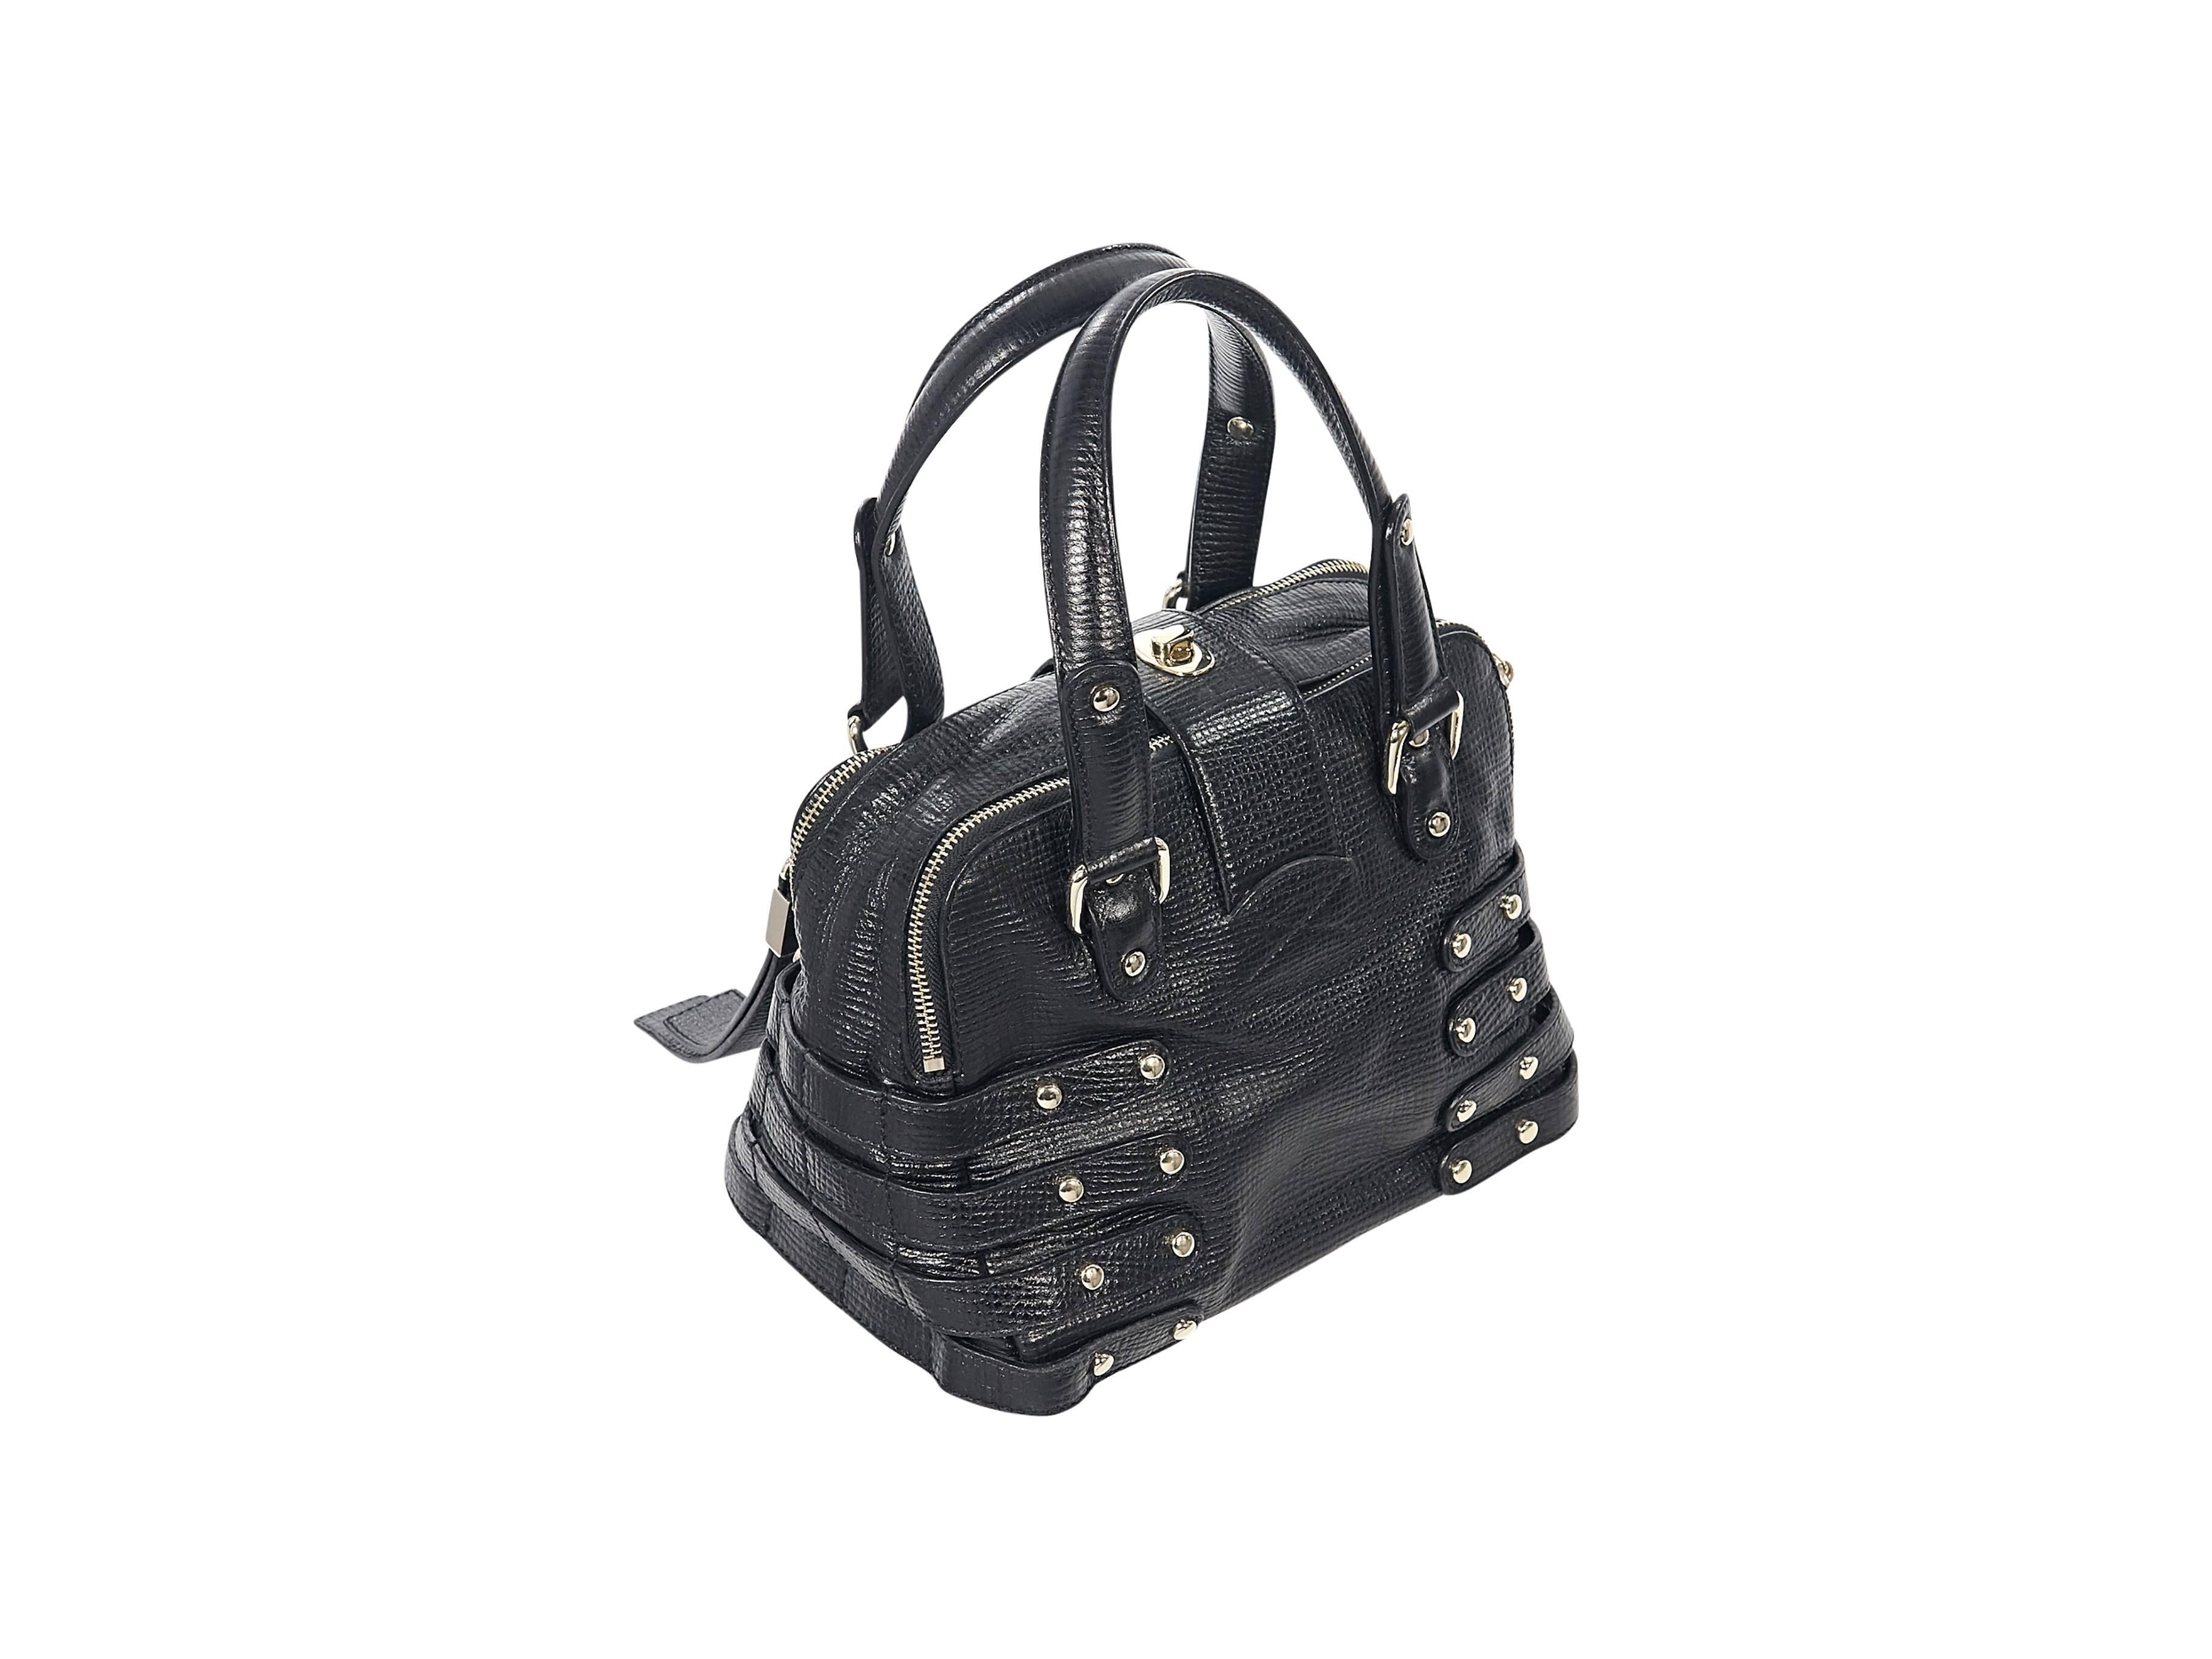 Product details: Black embossed small Bree tote bag by Jimmy Choo. Accented with multiple side straps. Dual carry handles. Twist-lock strap over two zip-close main compartments. Lined interior with inner slide and zip pockets. Protective metal feet.